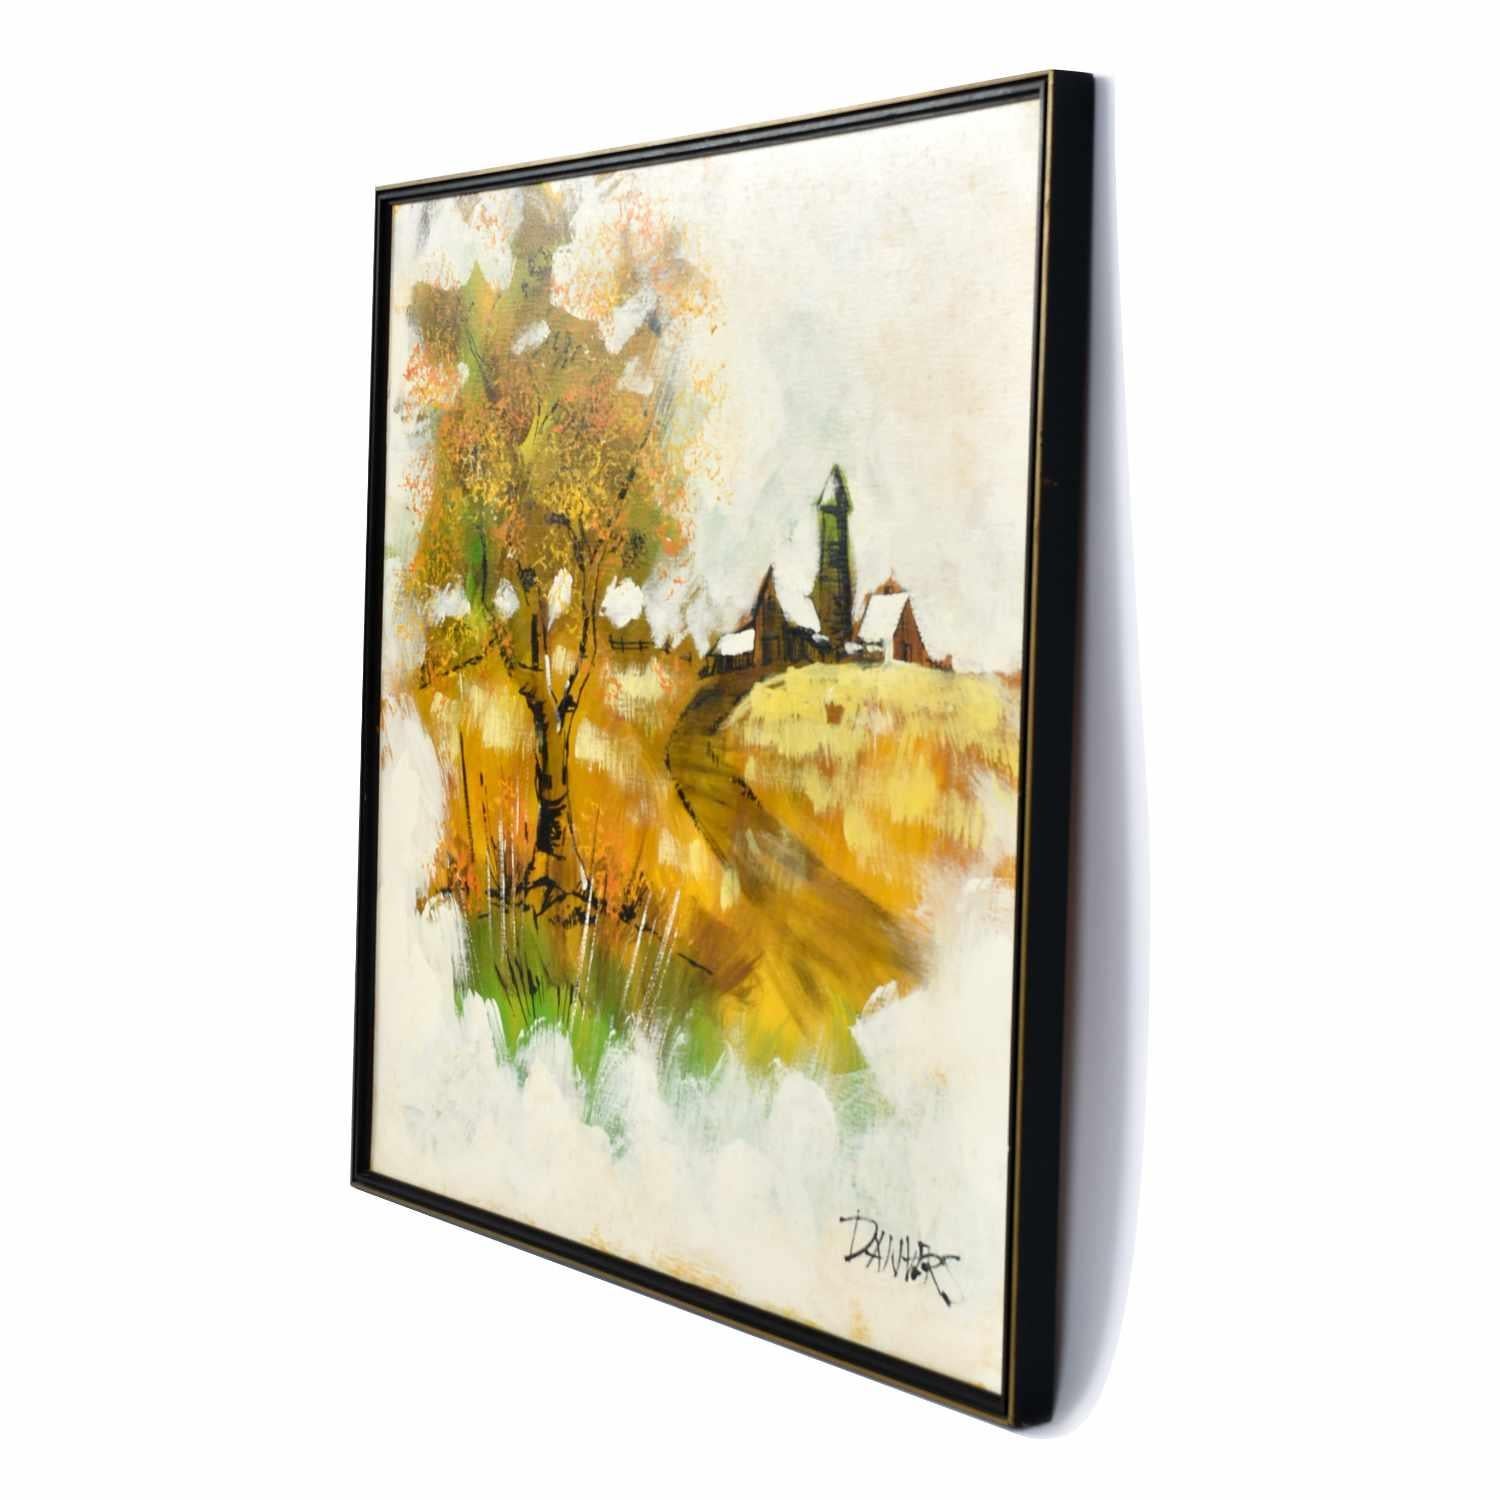 Handsome Mid-Century Modern rural homestead painting. The charming scene depicts a humble homestead in the distance, nestled amongst a pasture. A large tree commands the foreground while a pathway leads the viewer back toward the domicile. Earthy